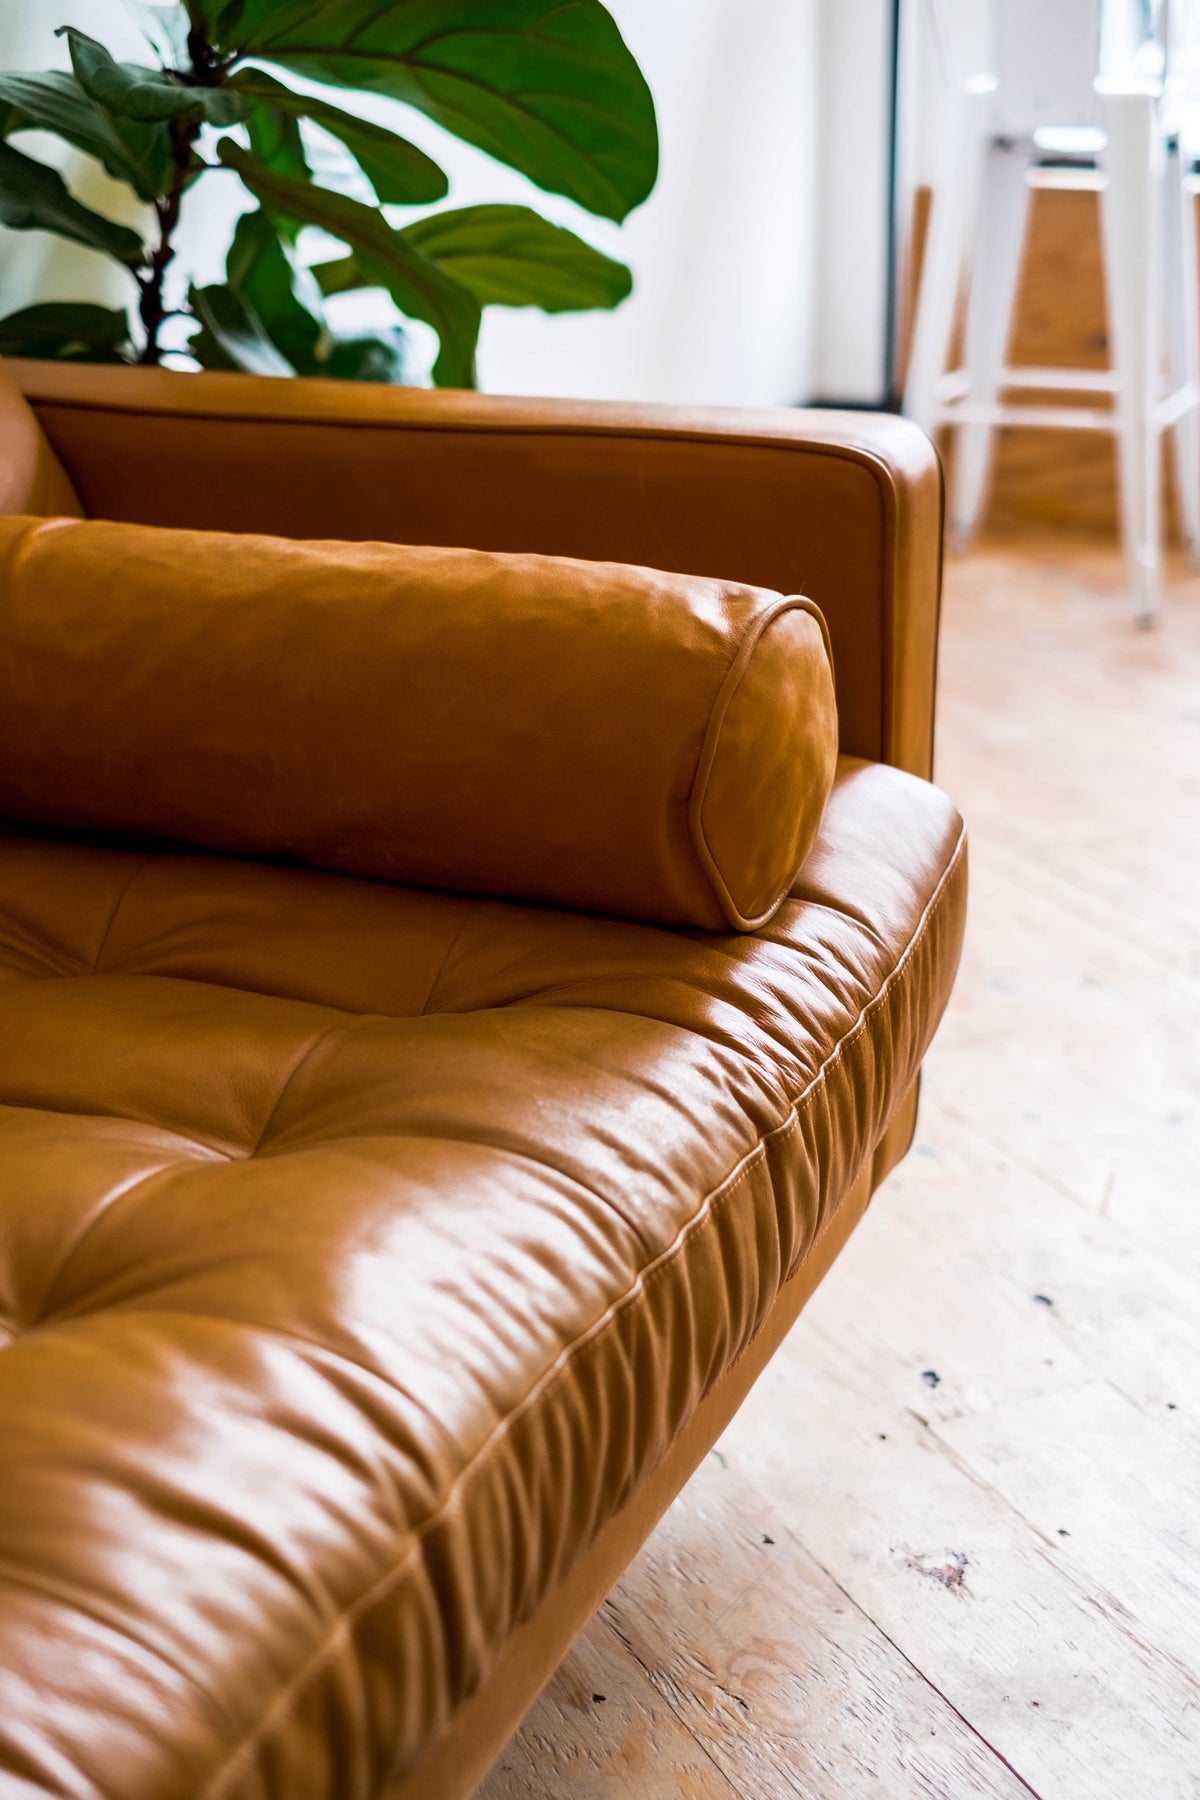 How to Clean Fake Leather Furniture